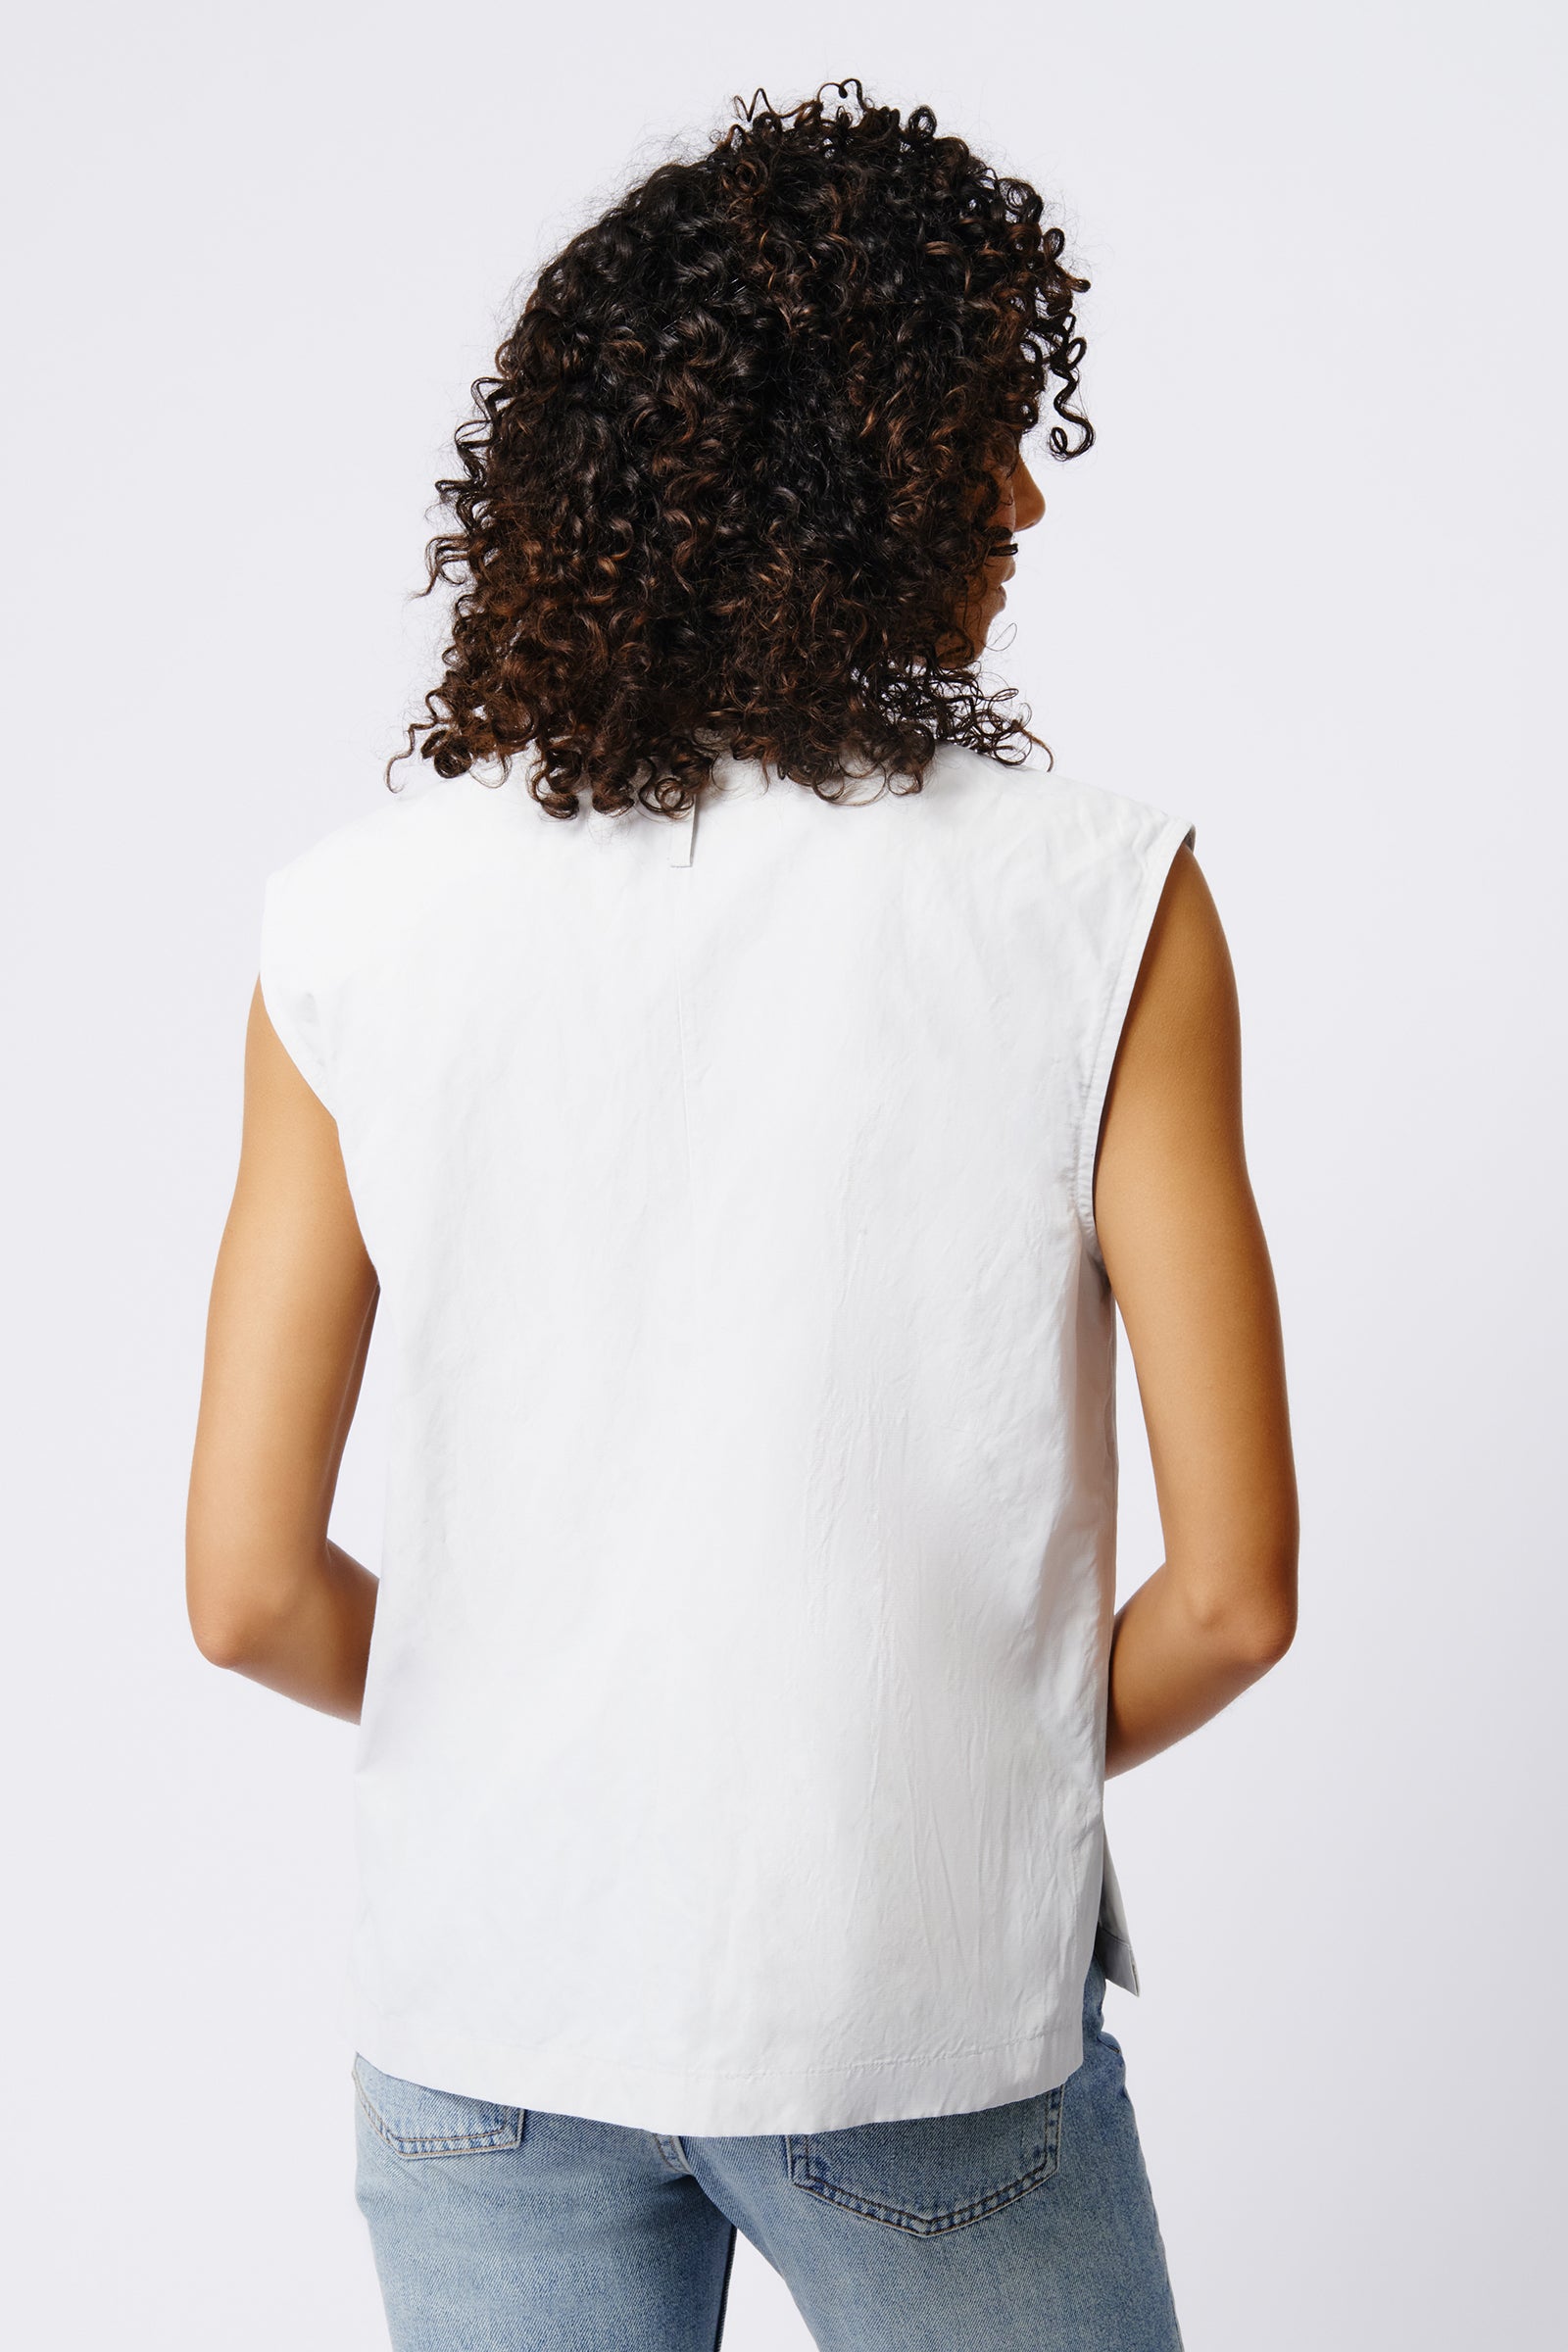 Kal Rieman Ava V Neck Shell in Stone on Model Front View Crop 2